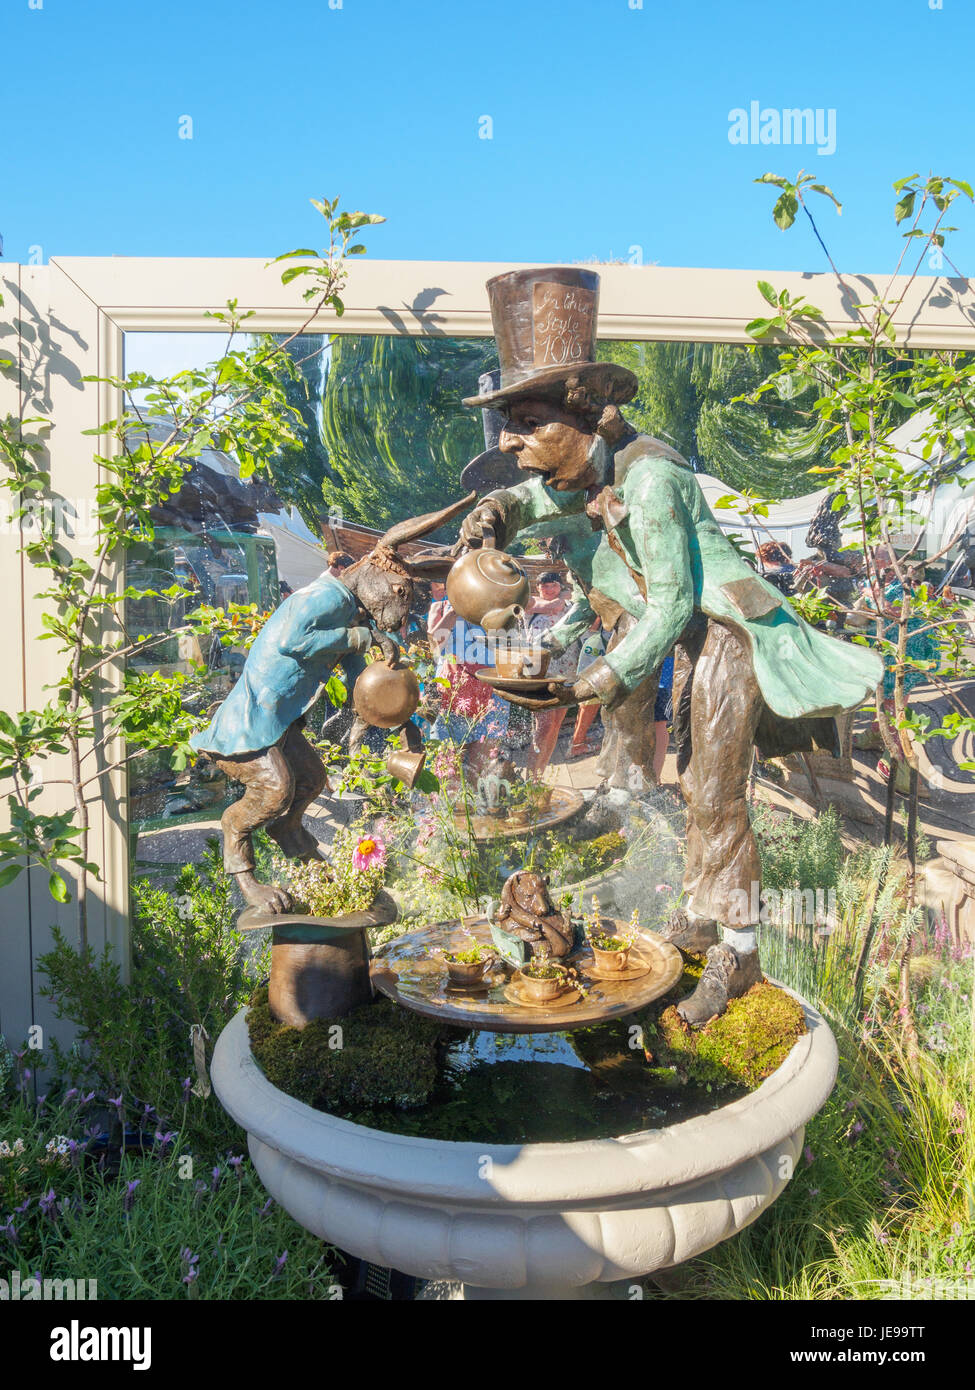 LONDON, UK - MAY 25, 2017: RHS Chelsea Flower Show 2017. Lewis Carroll's 'Alice in Wonderland' characters as sculptured garden figures. Stock Photo